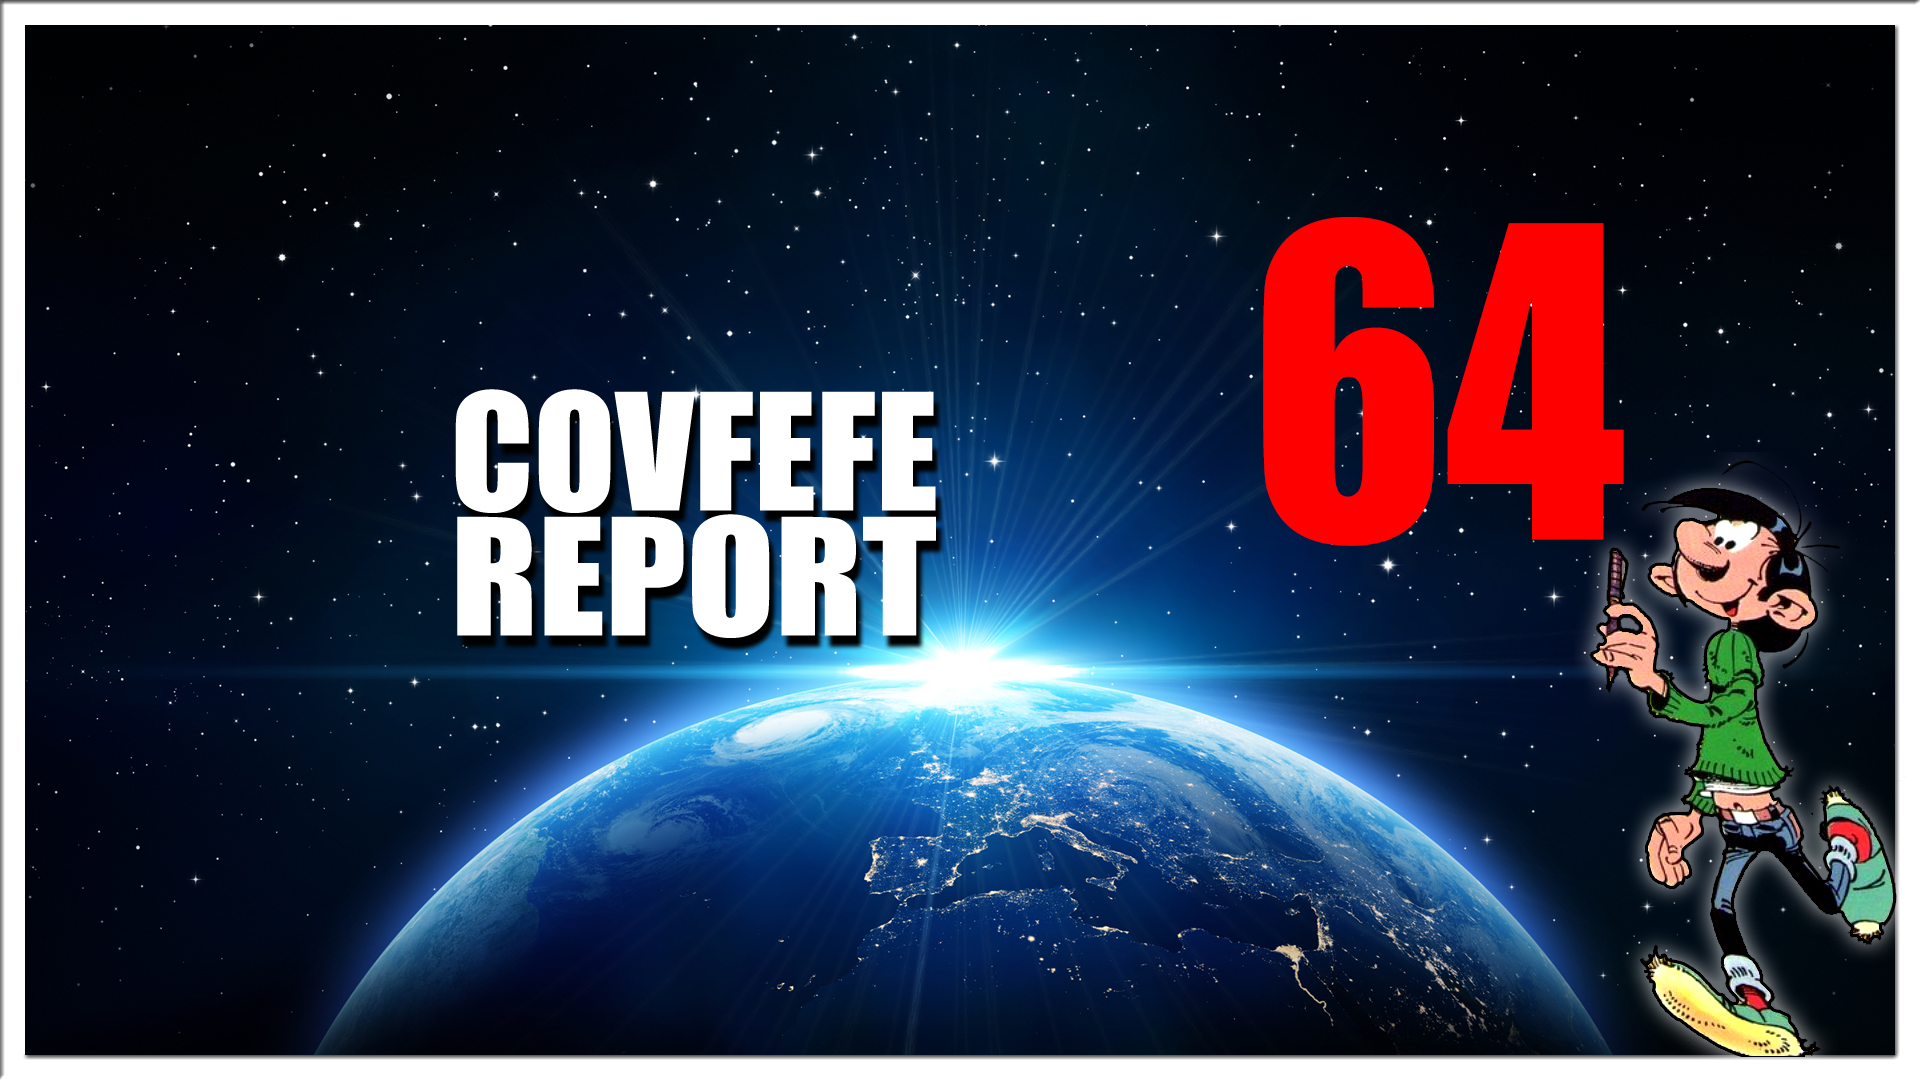 Covfefe Report 64. Kevin Spacey, Thierry Baudet, Poep kerstboodschap